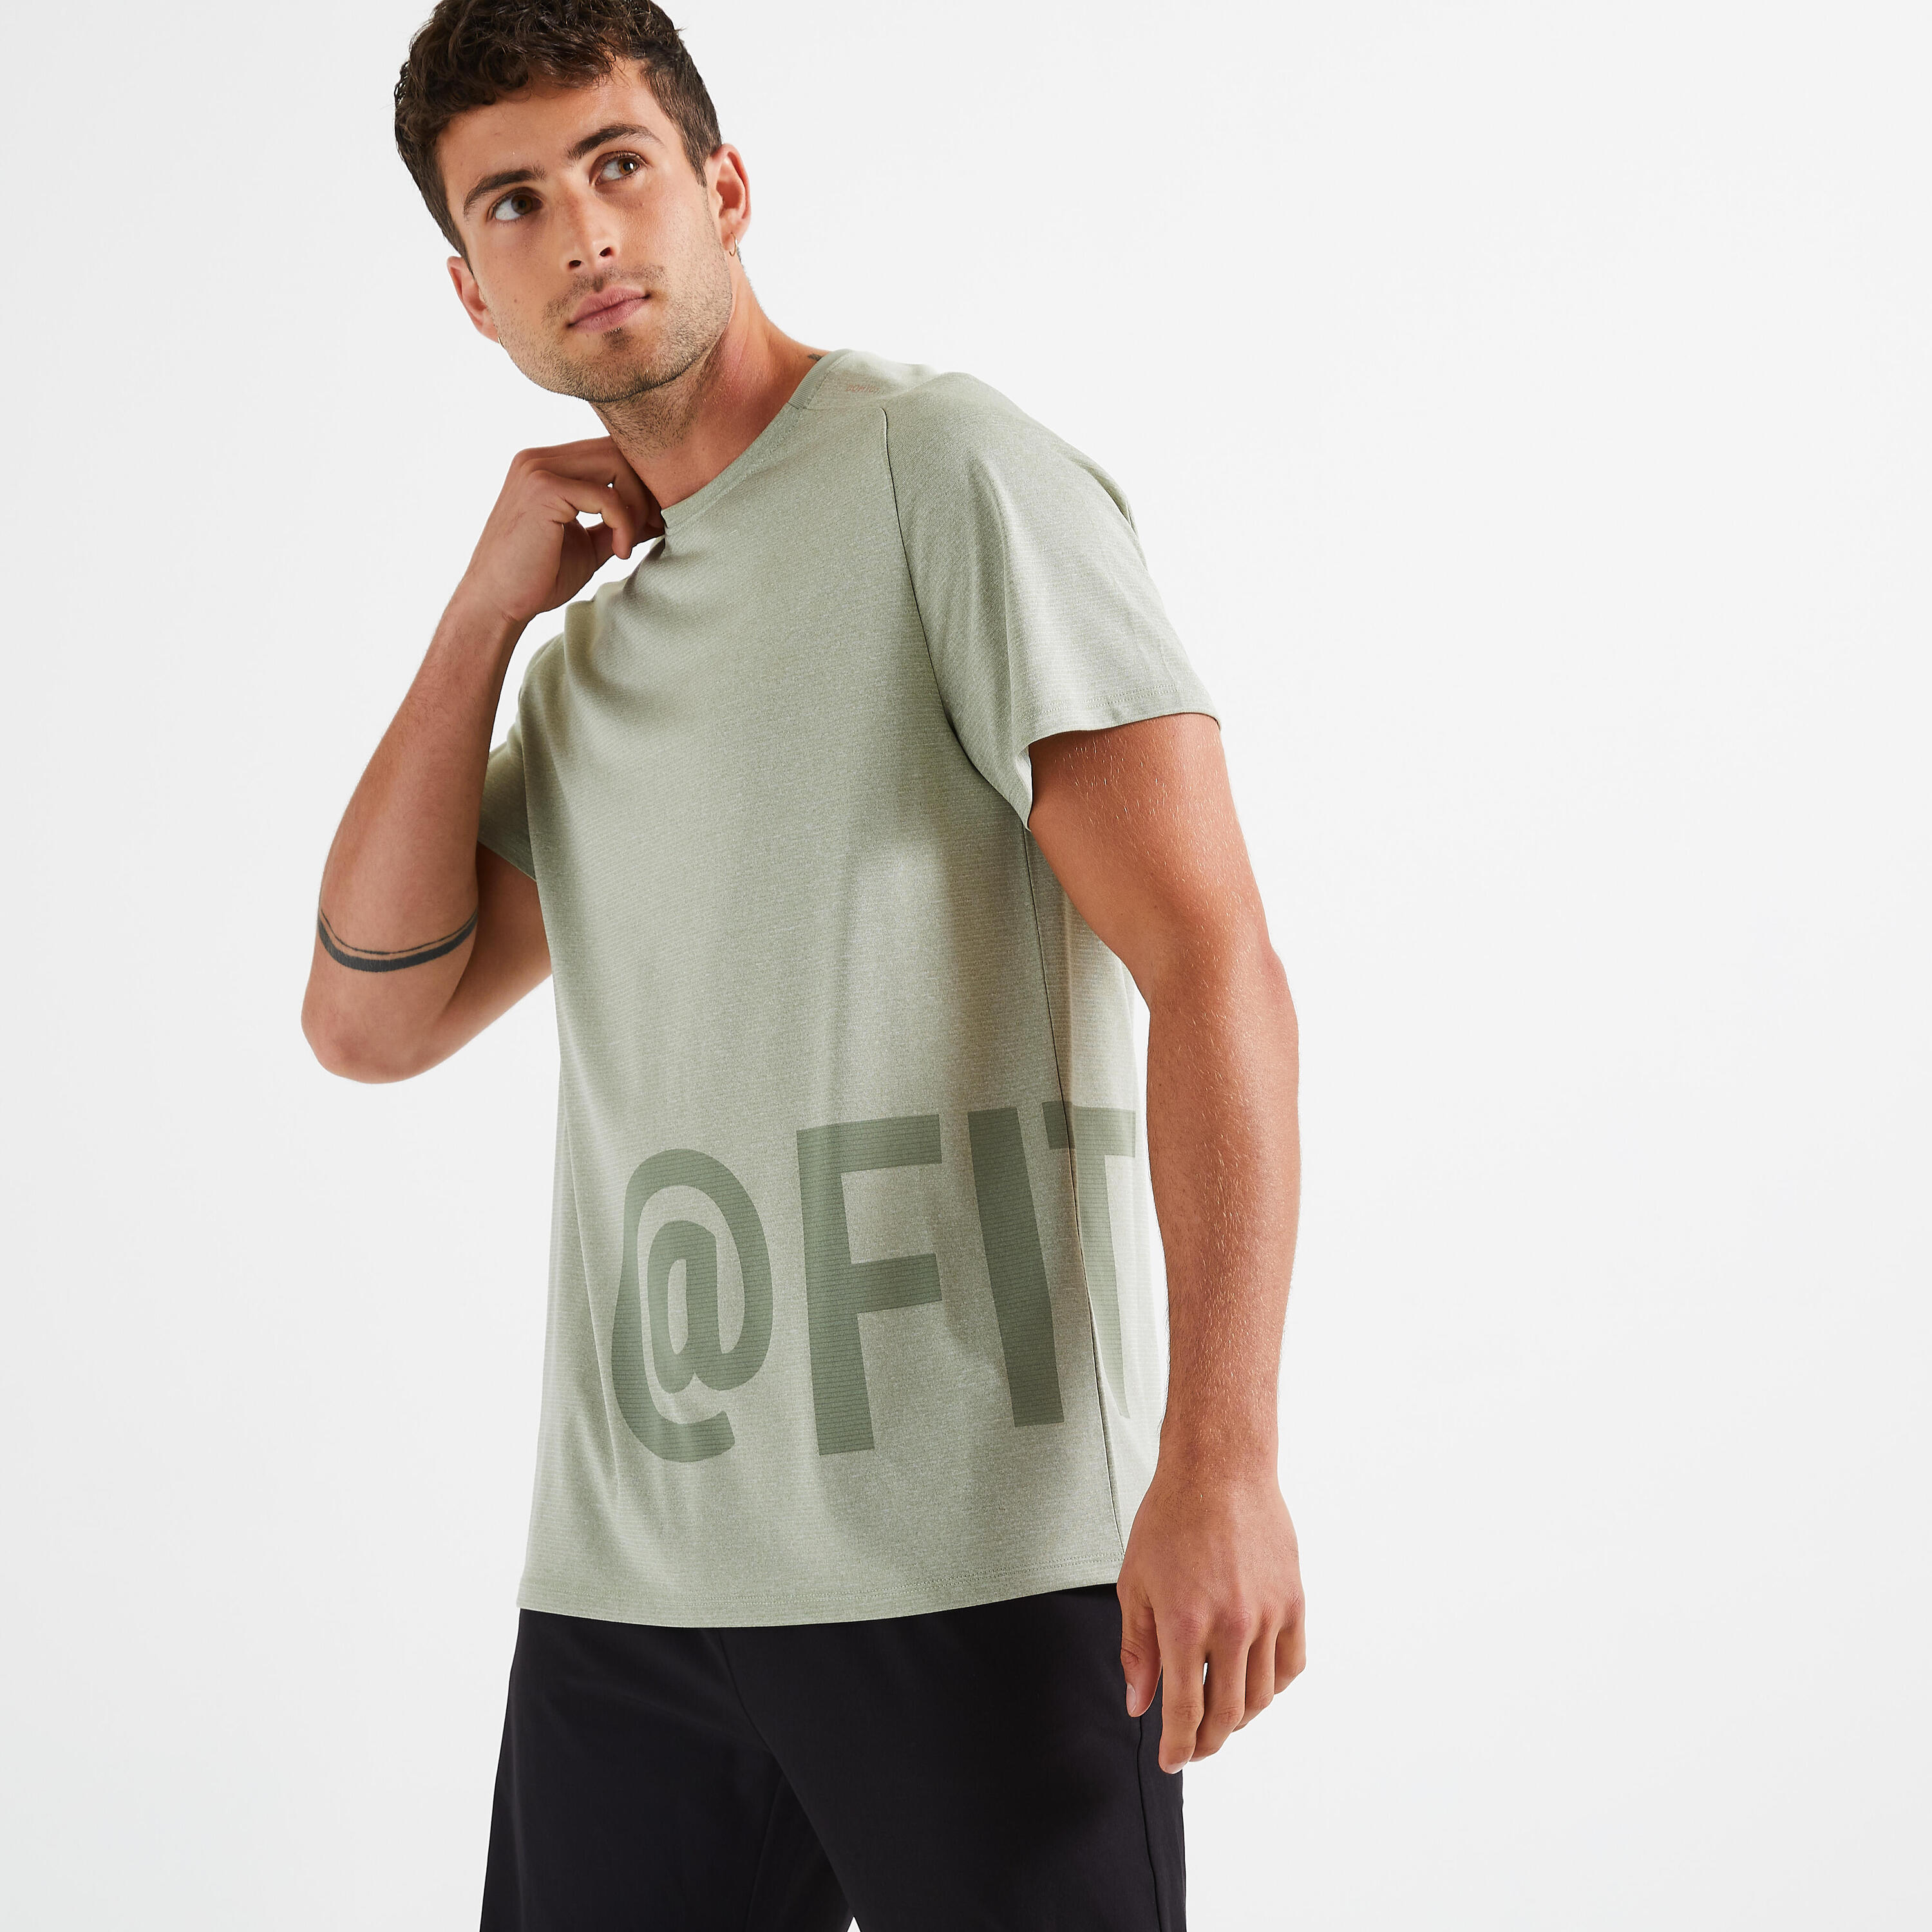 Men's Breathable Crew Neck Fitness Collection T-Shirt - Green Print 1/5